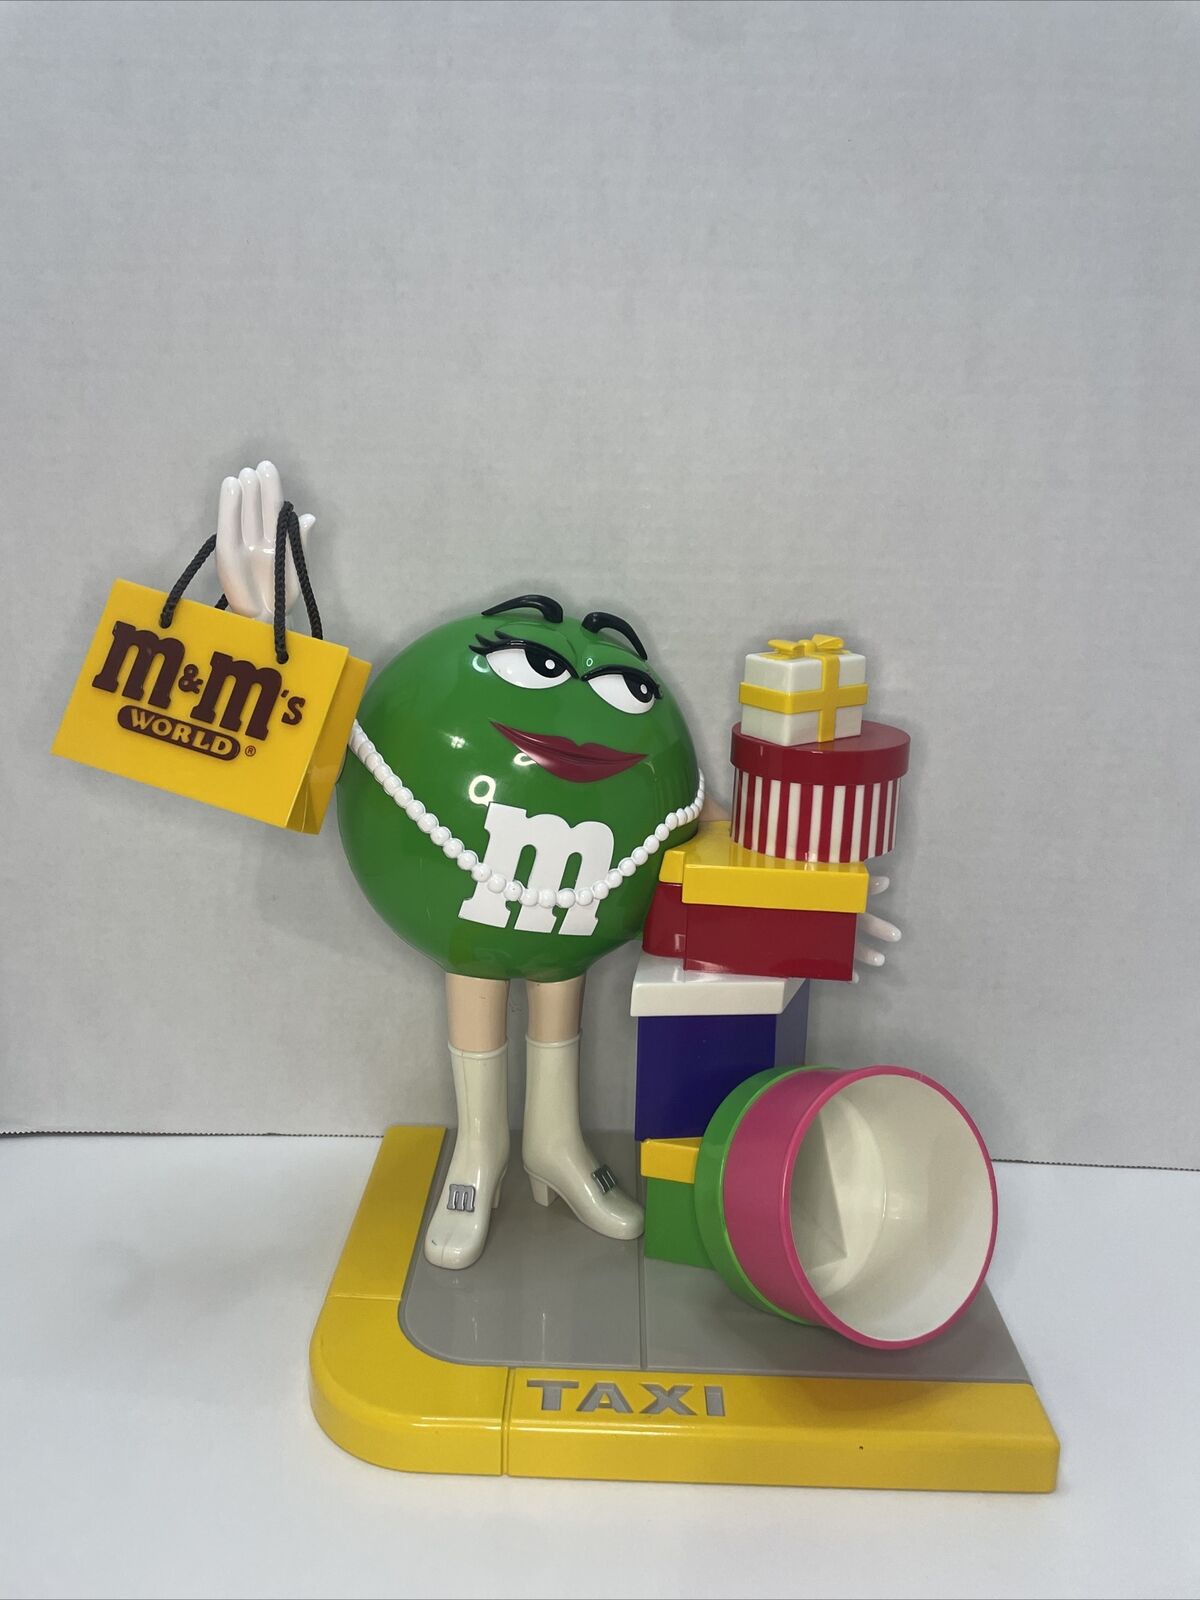 M&M’s World Green Shopper Candy Dispenser Taxi Vintage Collectible